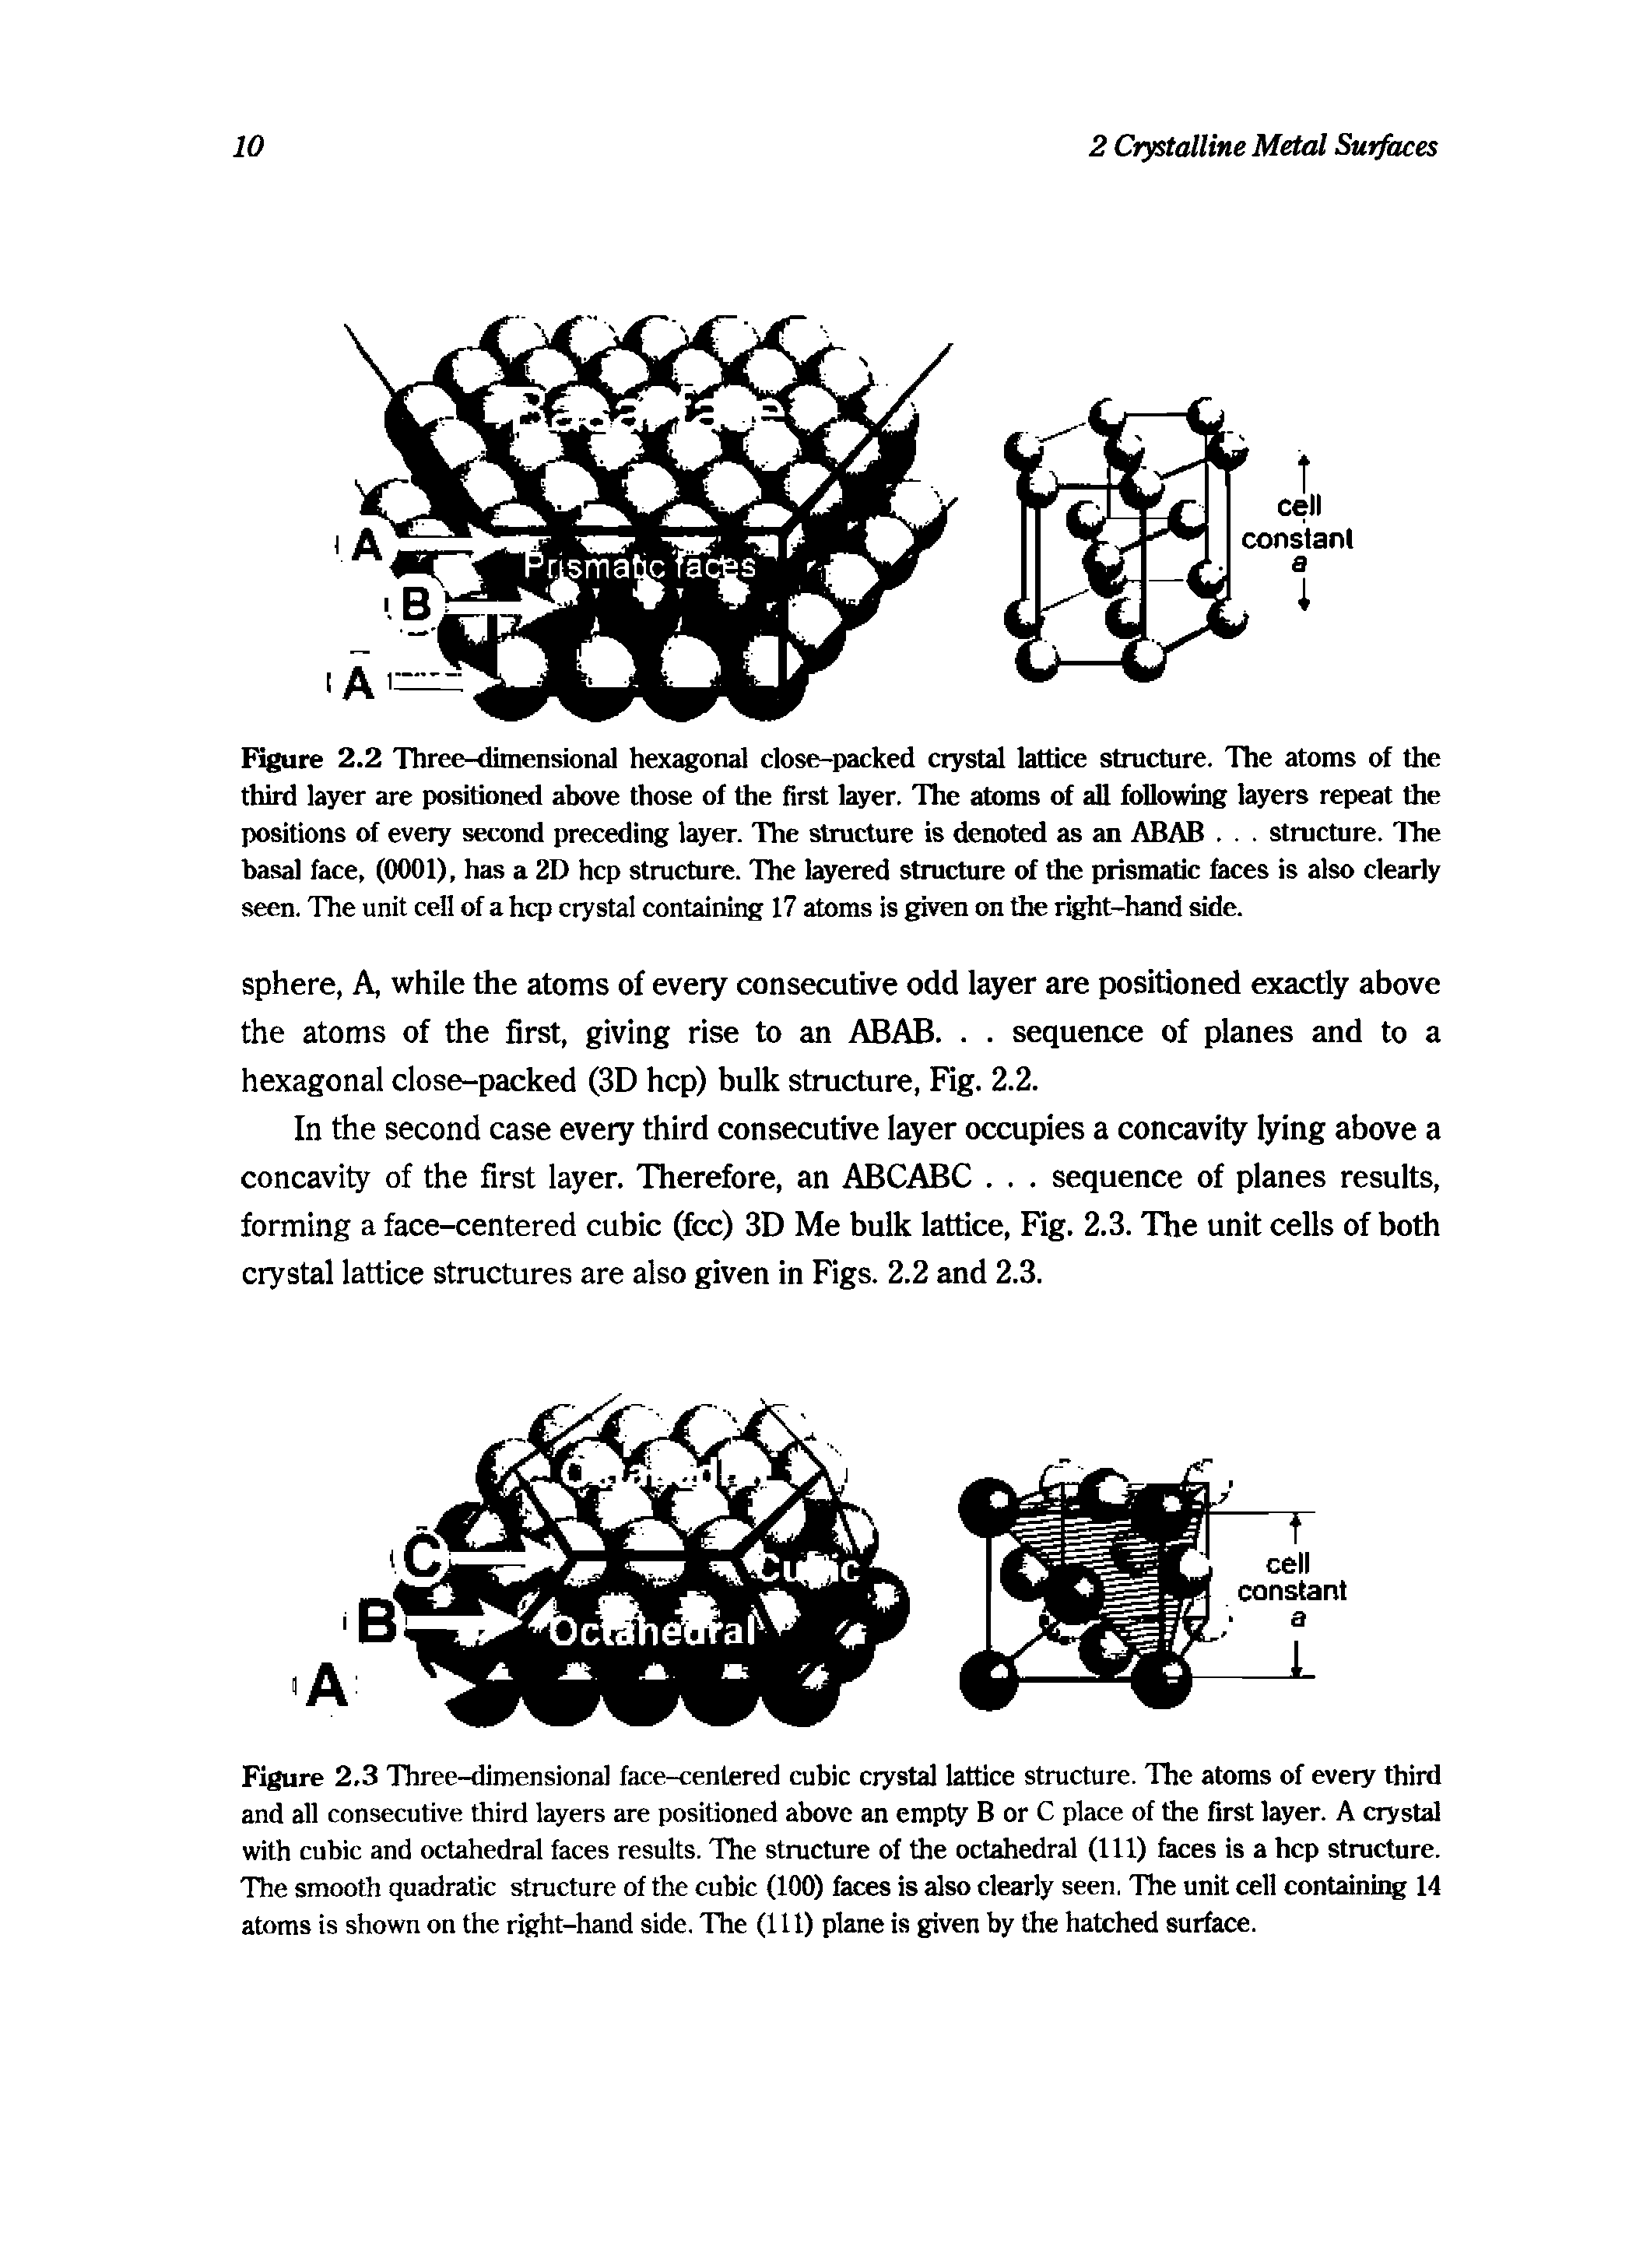 Figure 2,3 Three-dimensional face-centered cubic crystal lattice structure. The atoms of every third and all consecutive third layers are positioned above an empty B or C place of the first layer. A crystal with cubic and octahedral faces results. The structure of the octahedral (111) faces is a hep structure. The smooth quadratic structure of the cubic (100) faces is also clearly seen, The unit cell containing 14 atoms is shown on the right-hand side. The (111) plane is given by the hatched surface.